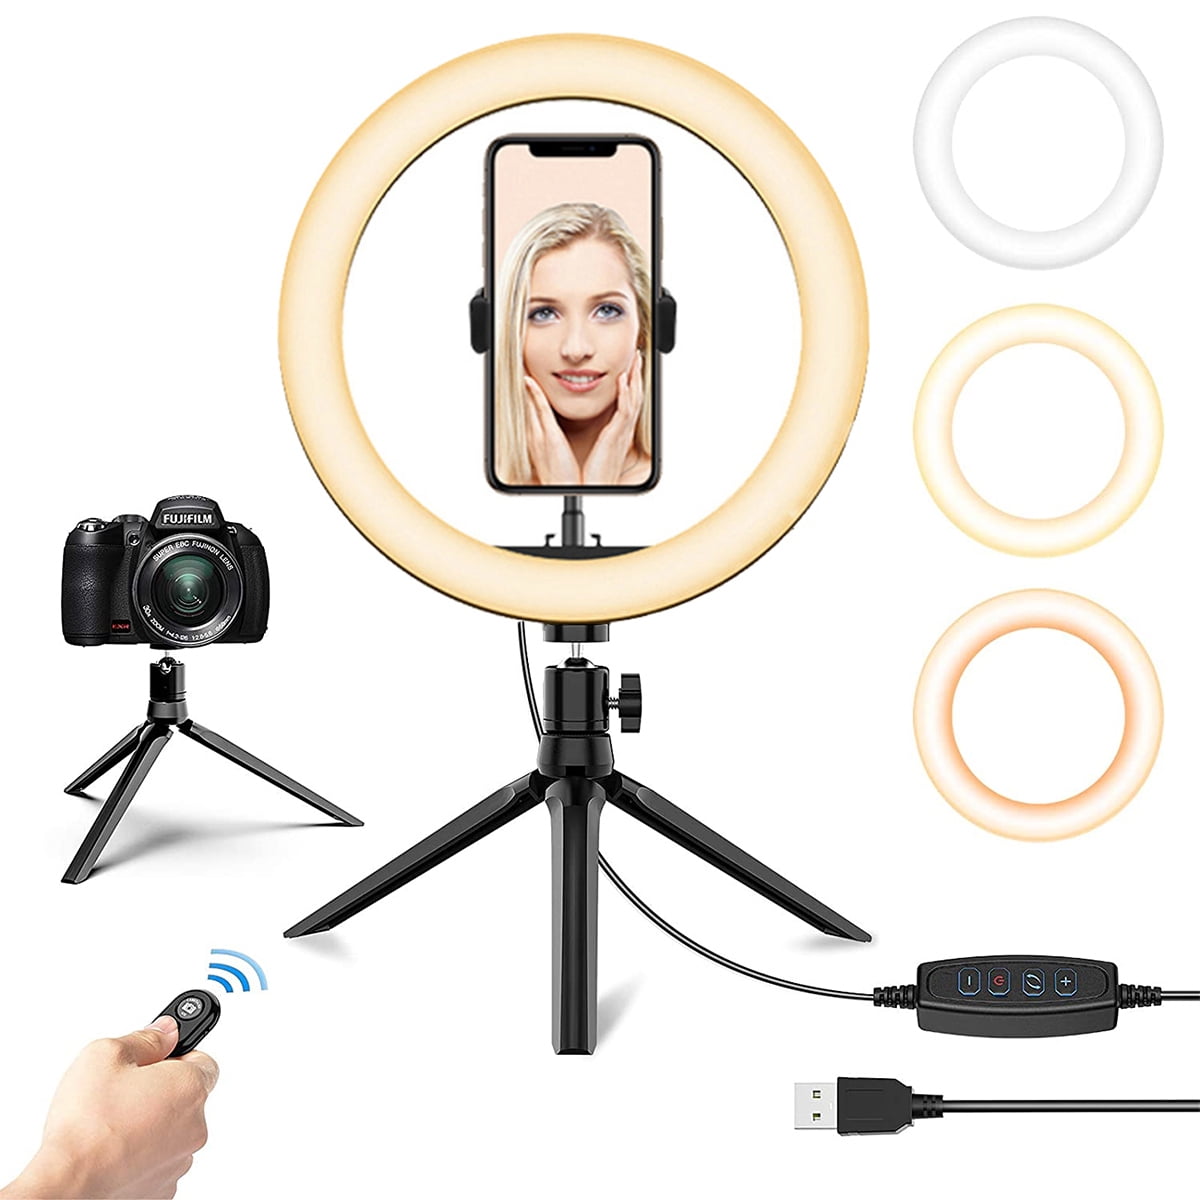 3 Lighting Modes and 10 Brightness Levels of Dimmable Tabletop LED Ring Light for YouTube Video/Live Streaming/Selfie/Vlog/Photography/Makeup 10 Inch Ring Light with Stand & Phone Holder